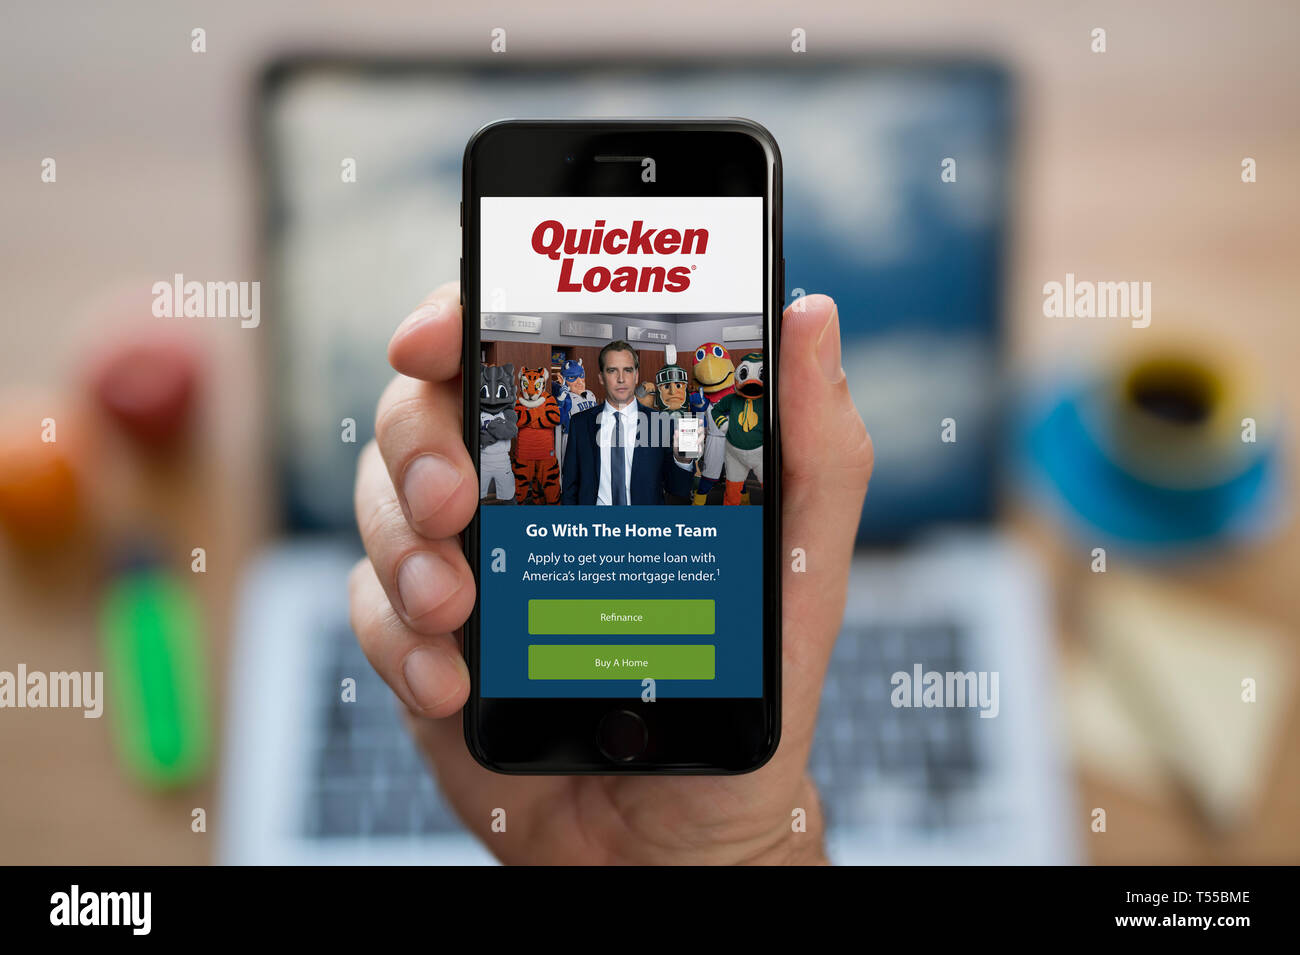 A man looks at his iPhone which displays the Quicken Loans logo (Editorial use only). Stock Photo